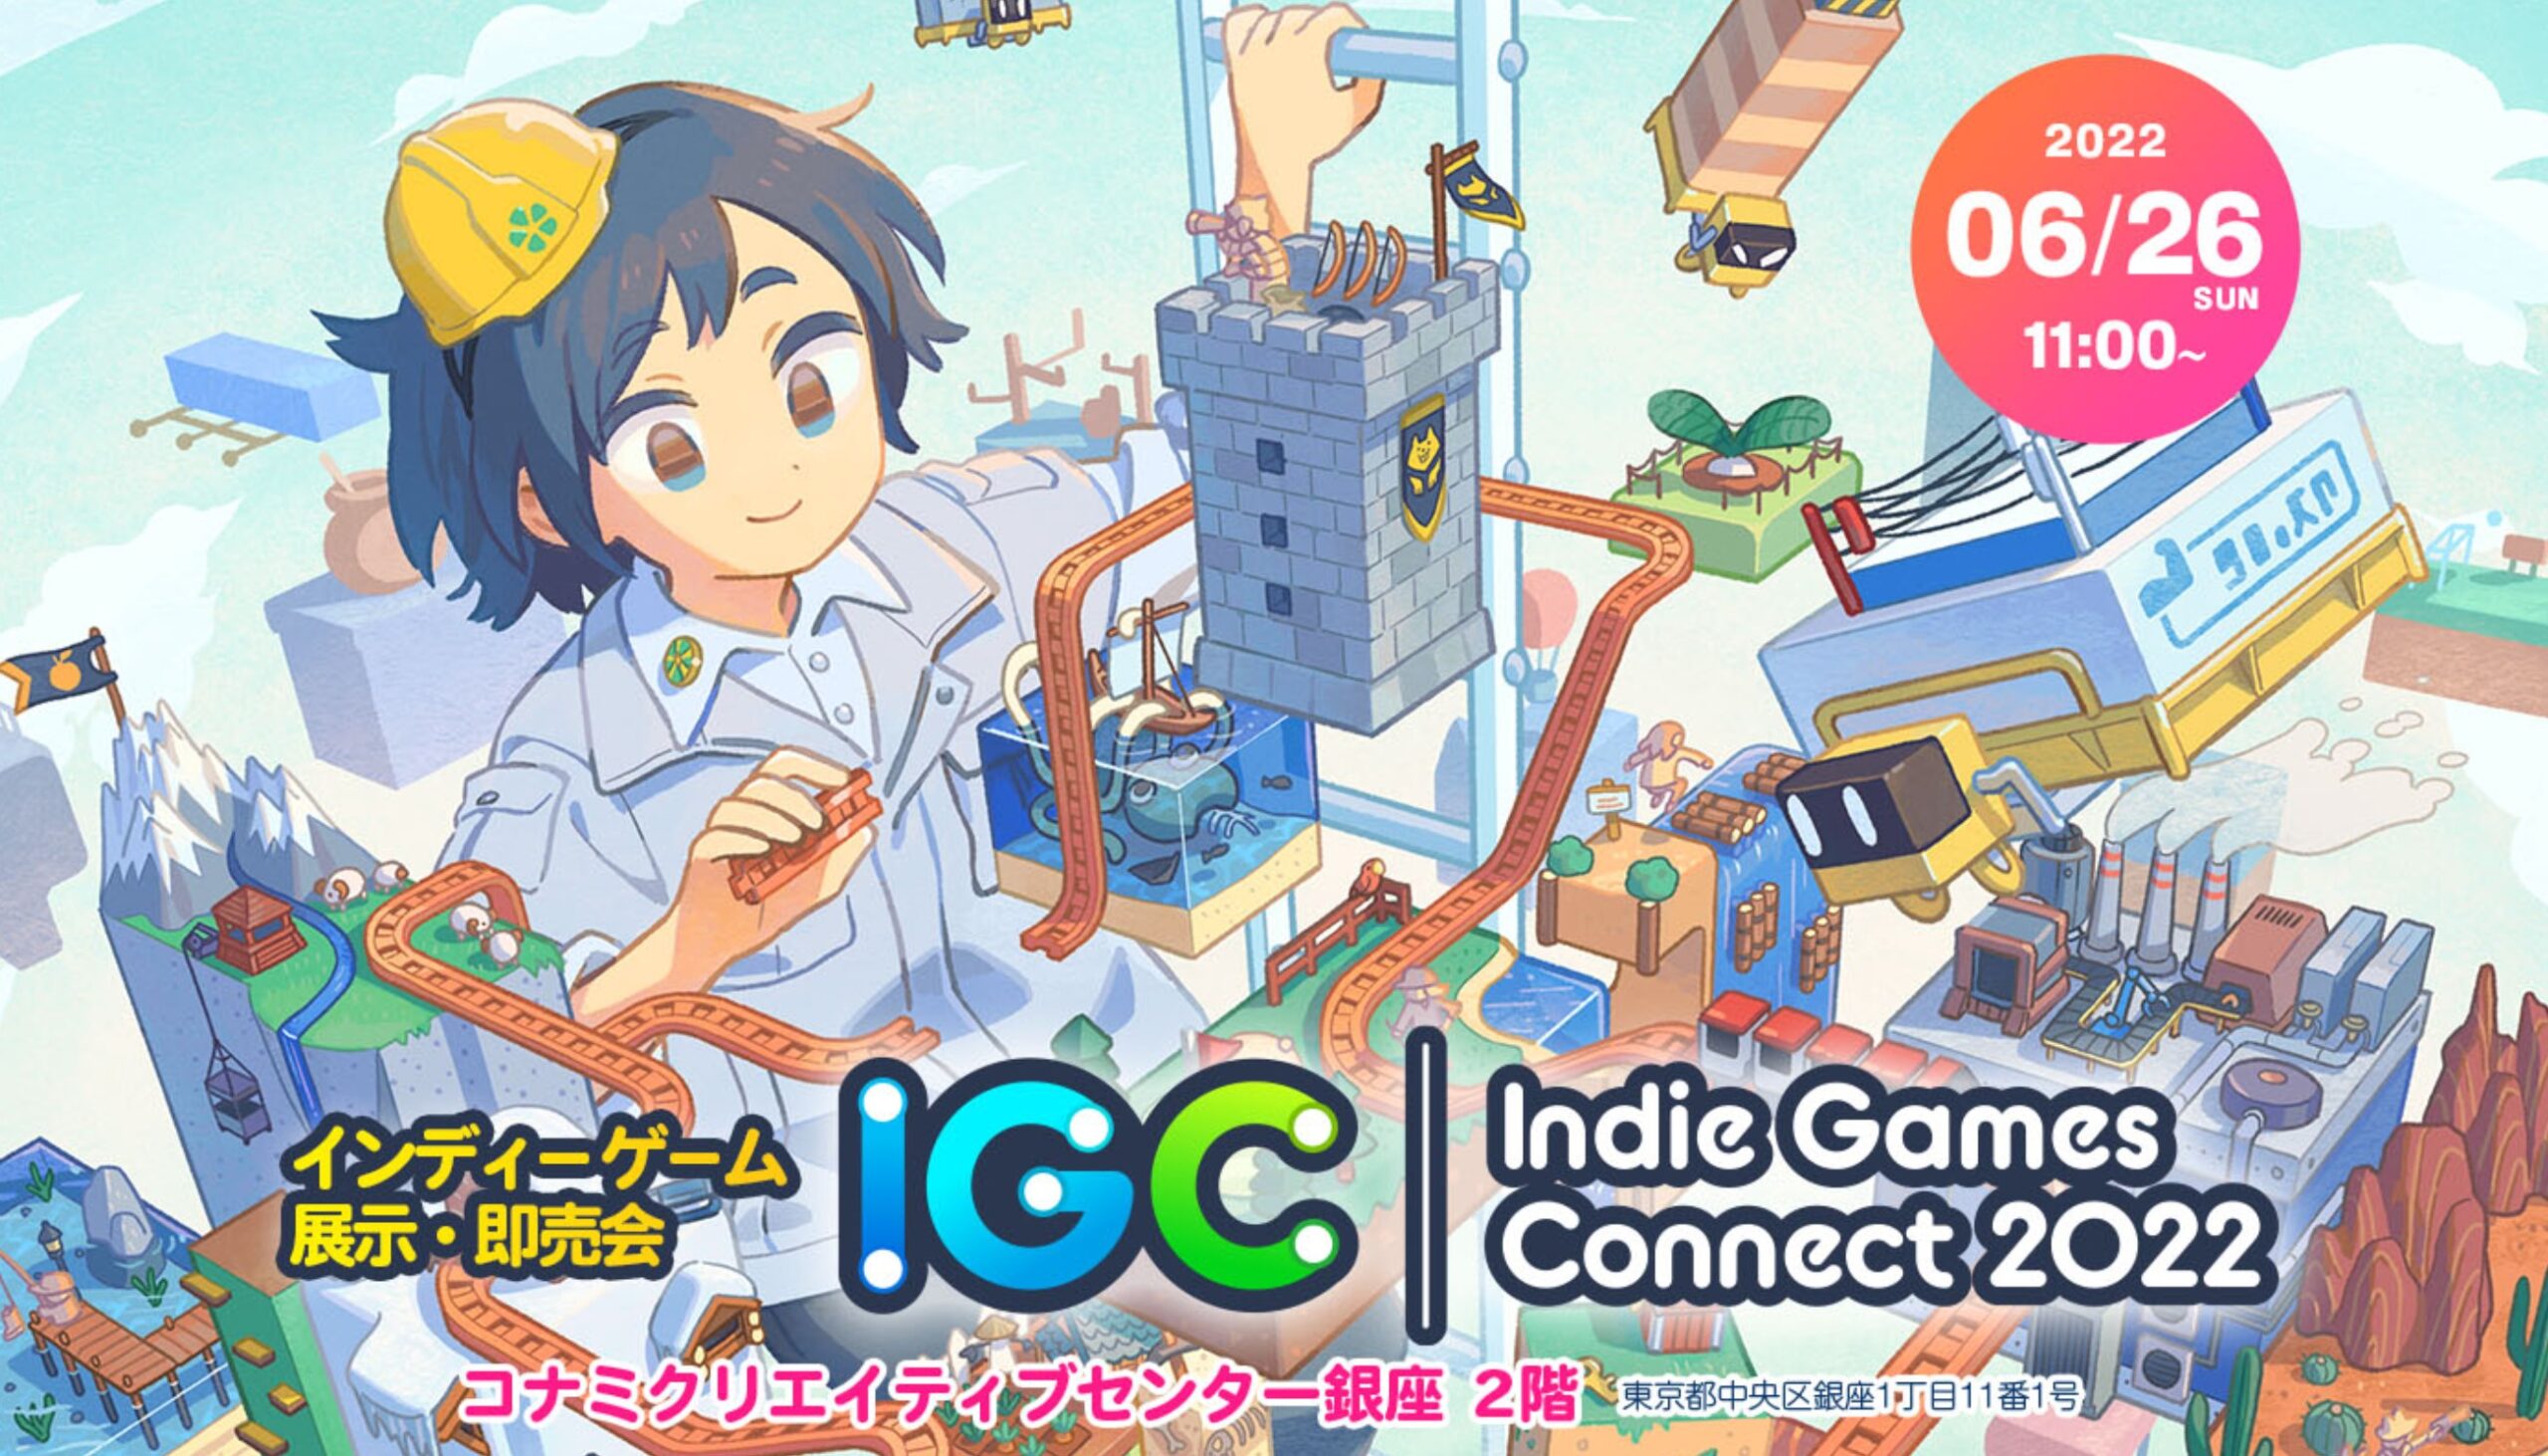 Konami is holding a free indie games convention in Japan VGC